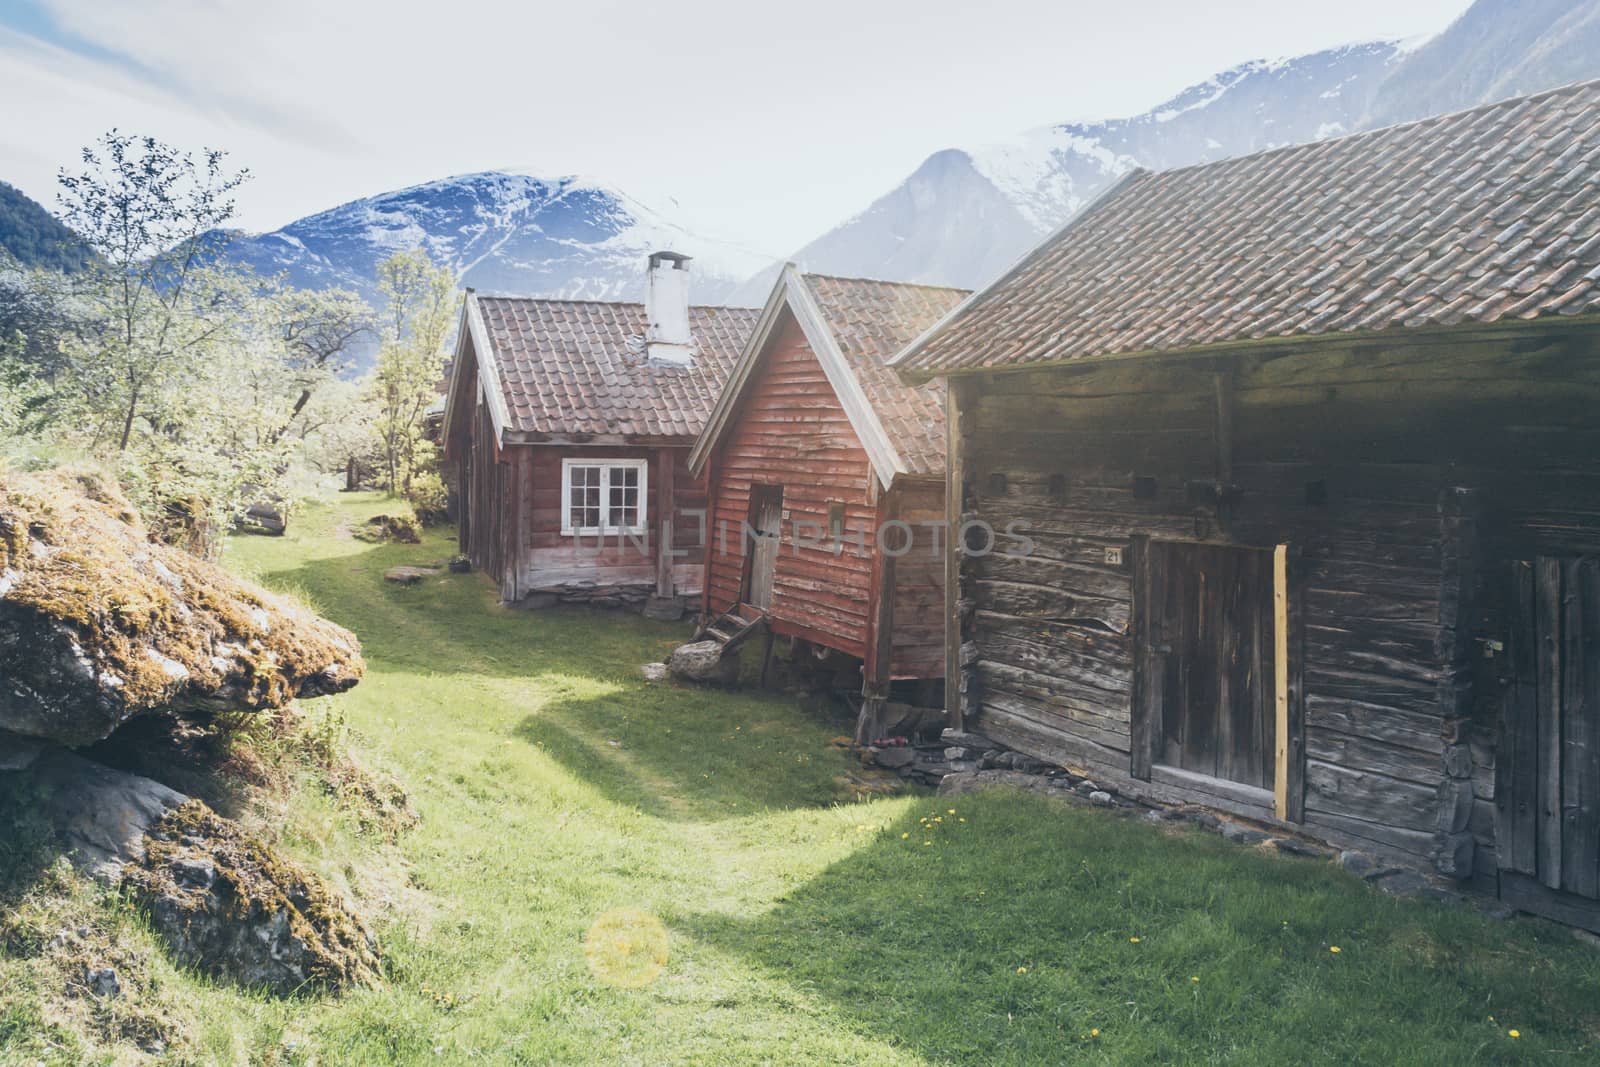 view on the wooden houses of this old historical farm village of Otternes, Norway by kb79